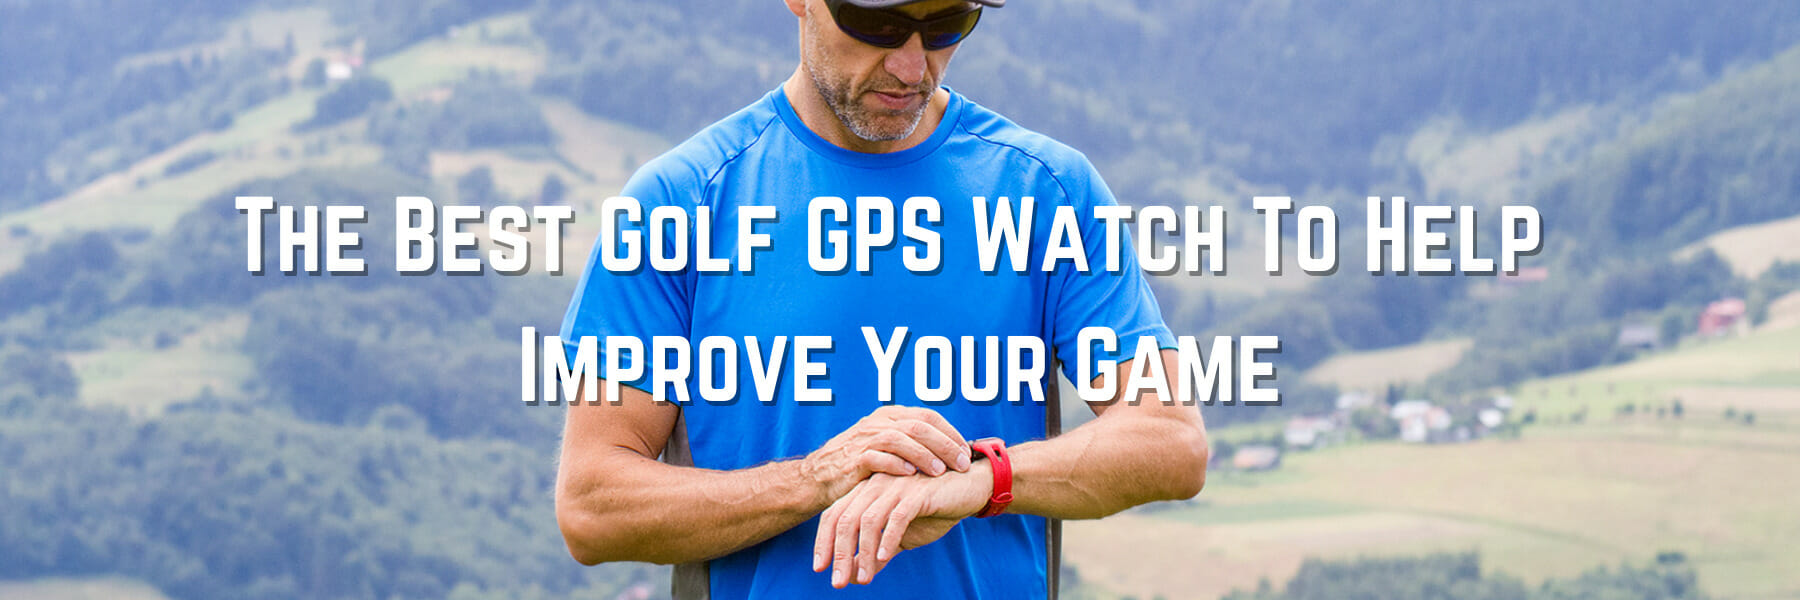 The Best Golf GPS Watch To Help Improve Your Game